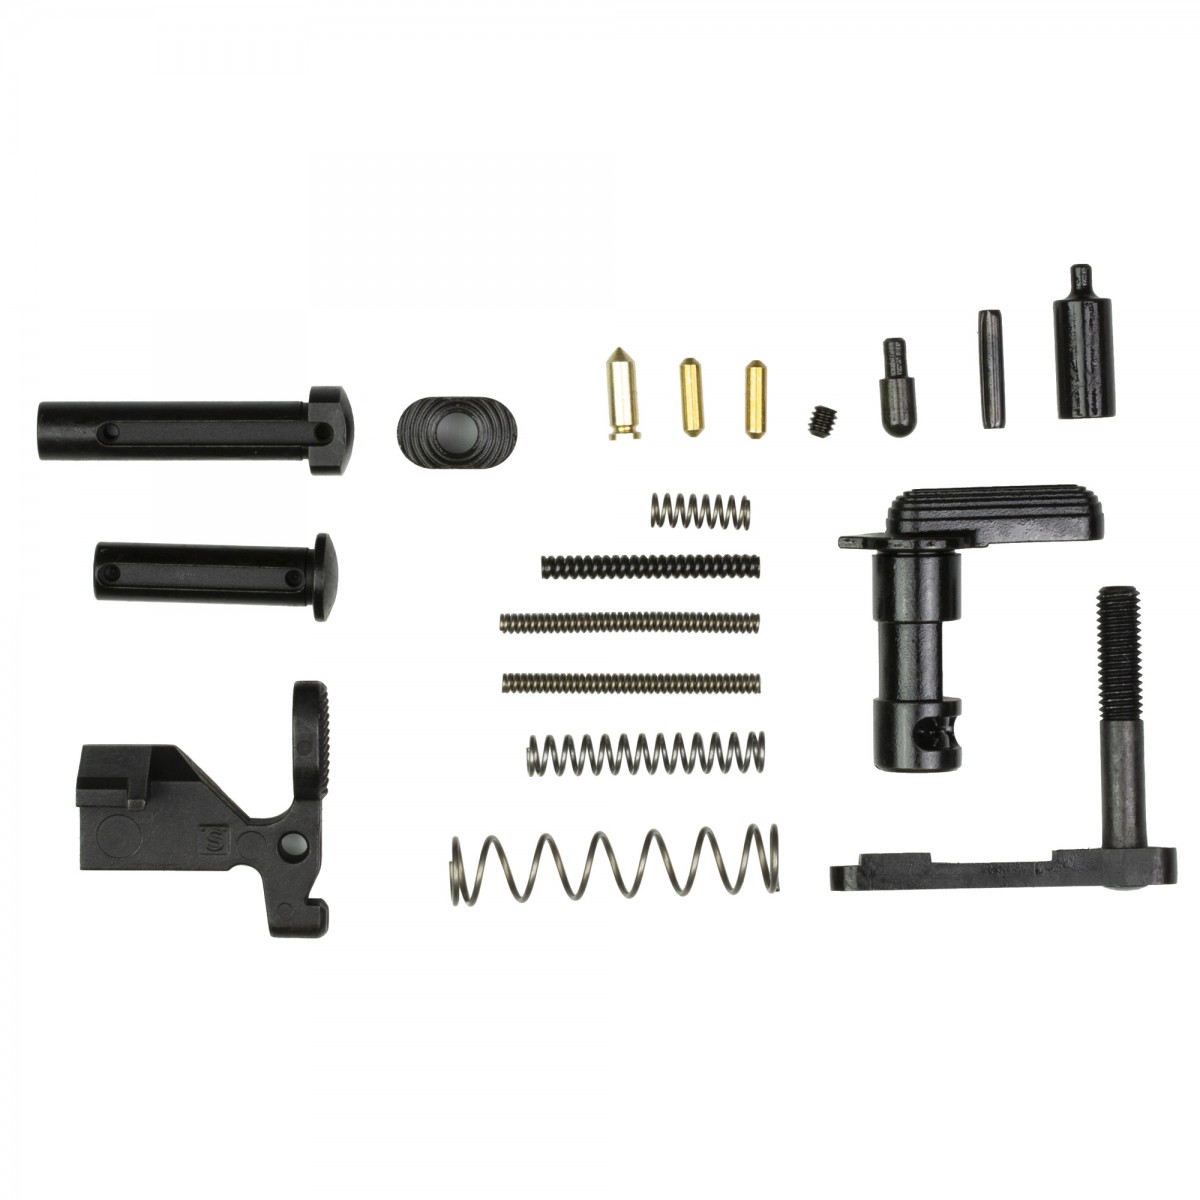 Aero Precision AR-15 Lower Parts Kit without FCG, Grip or Trigger